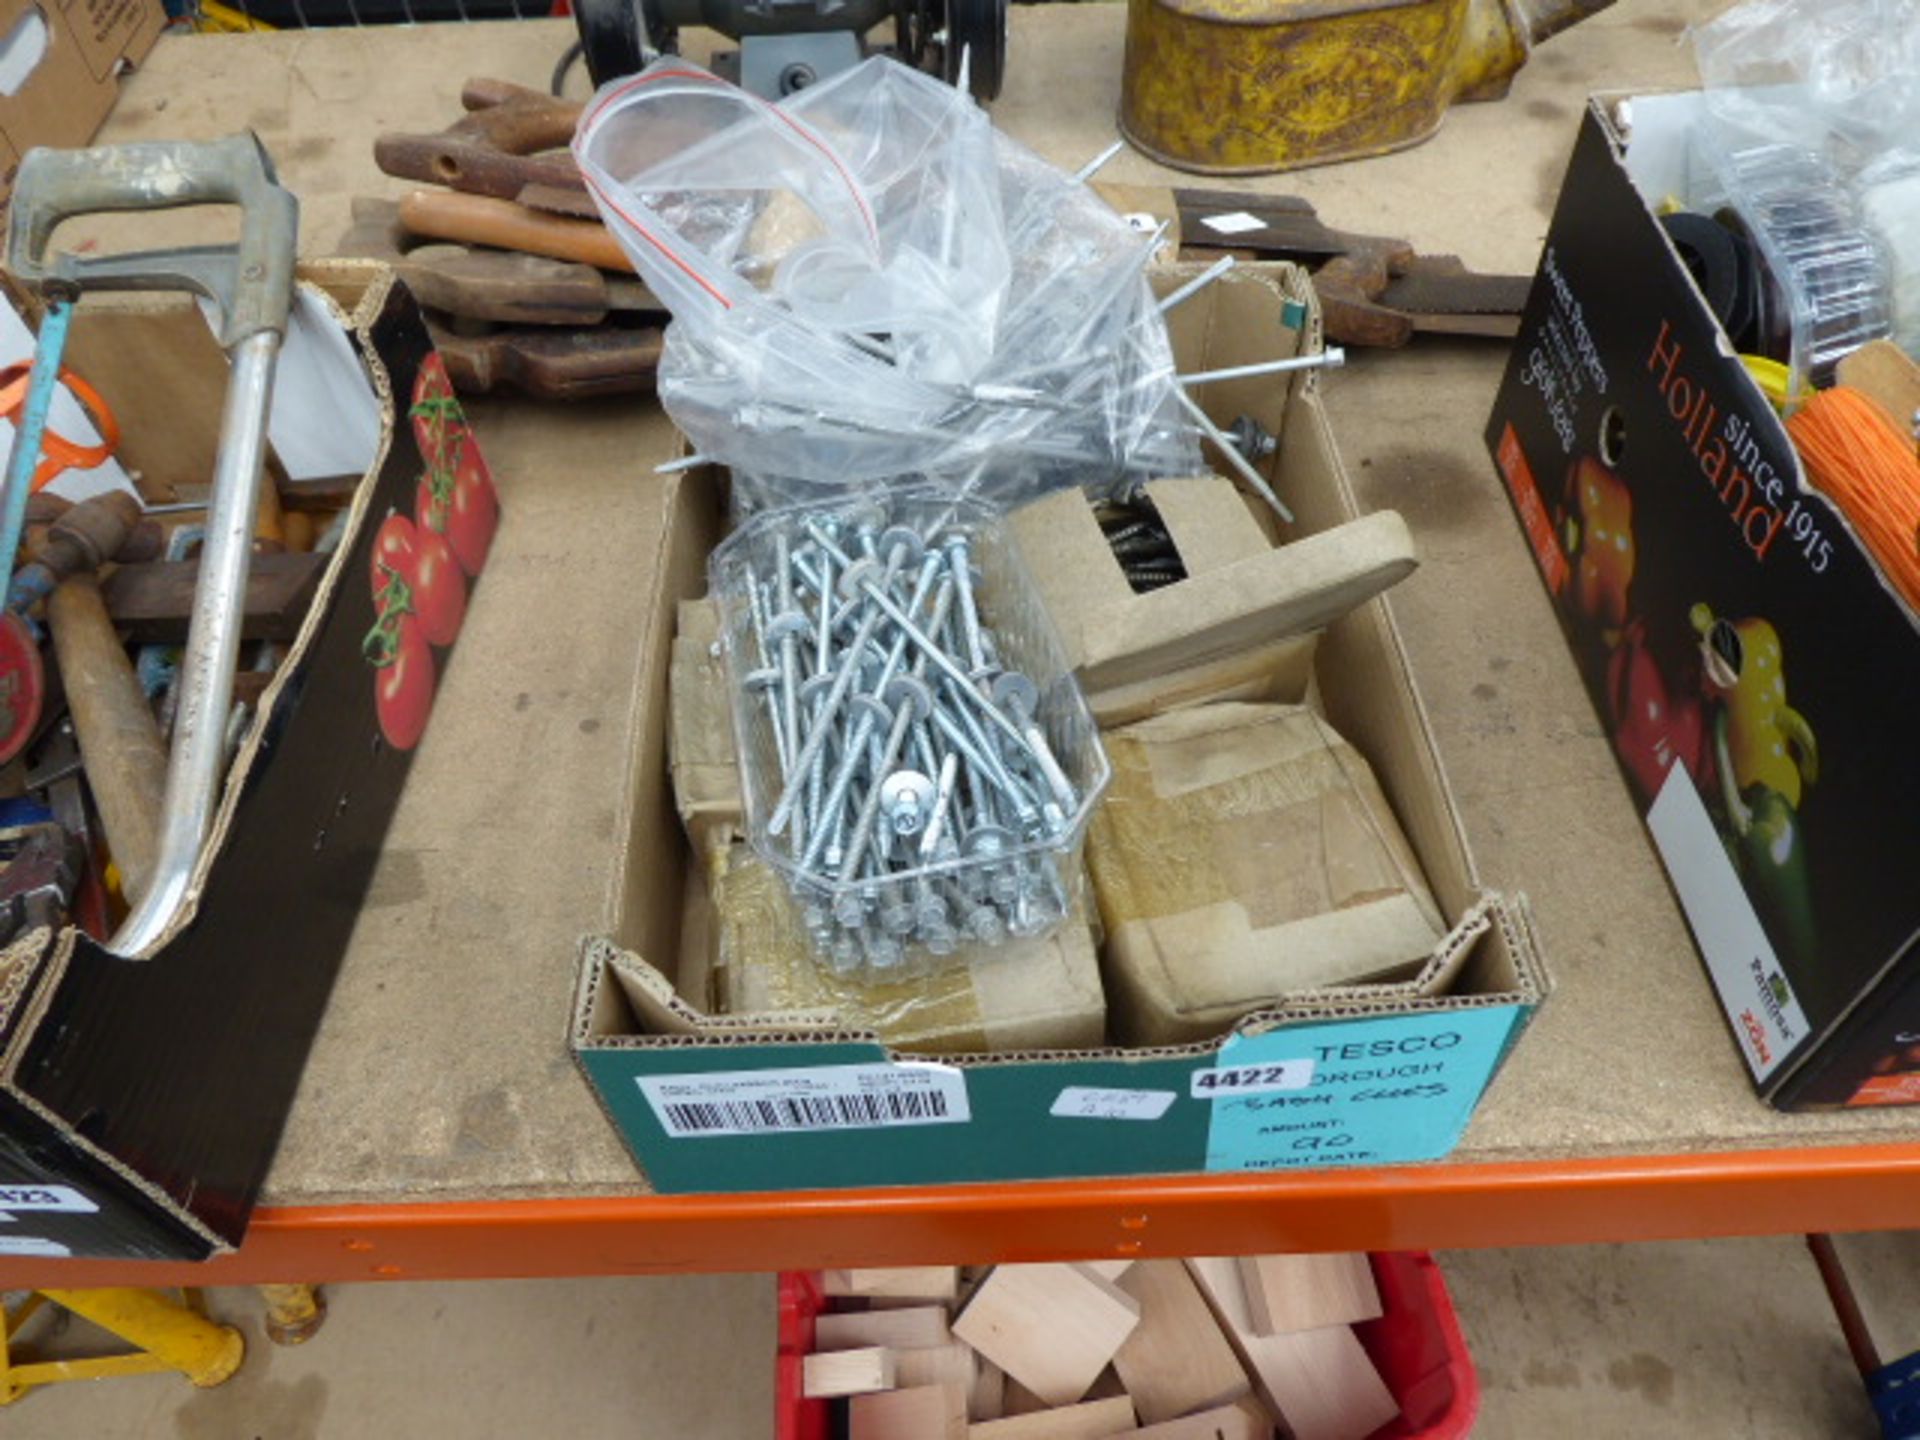 Box of roof bolts and screws